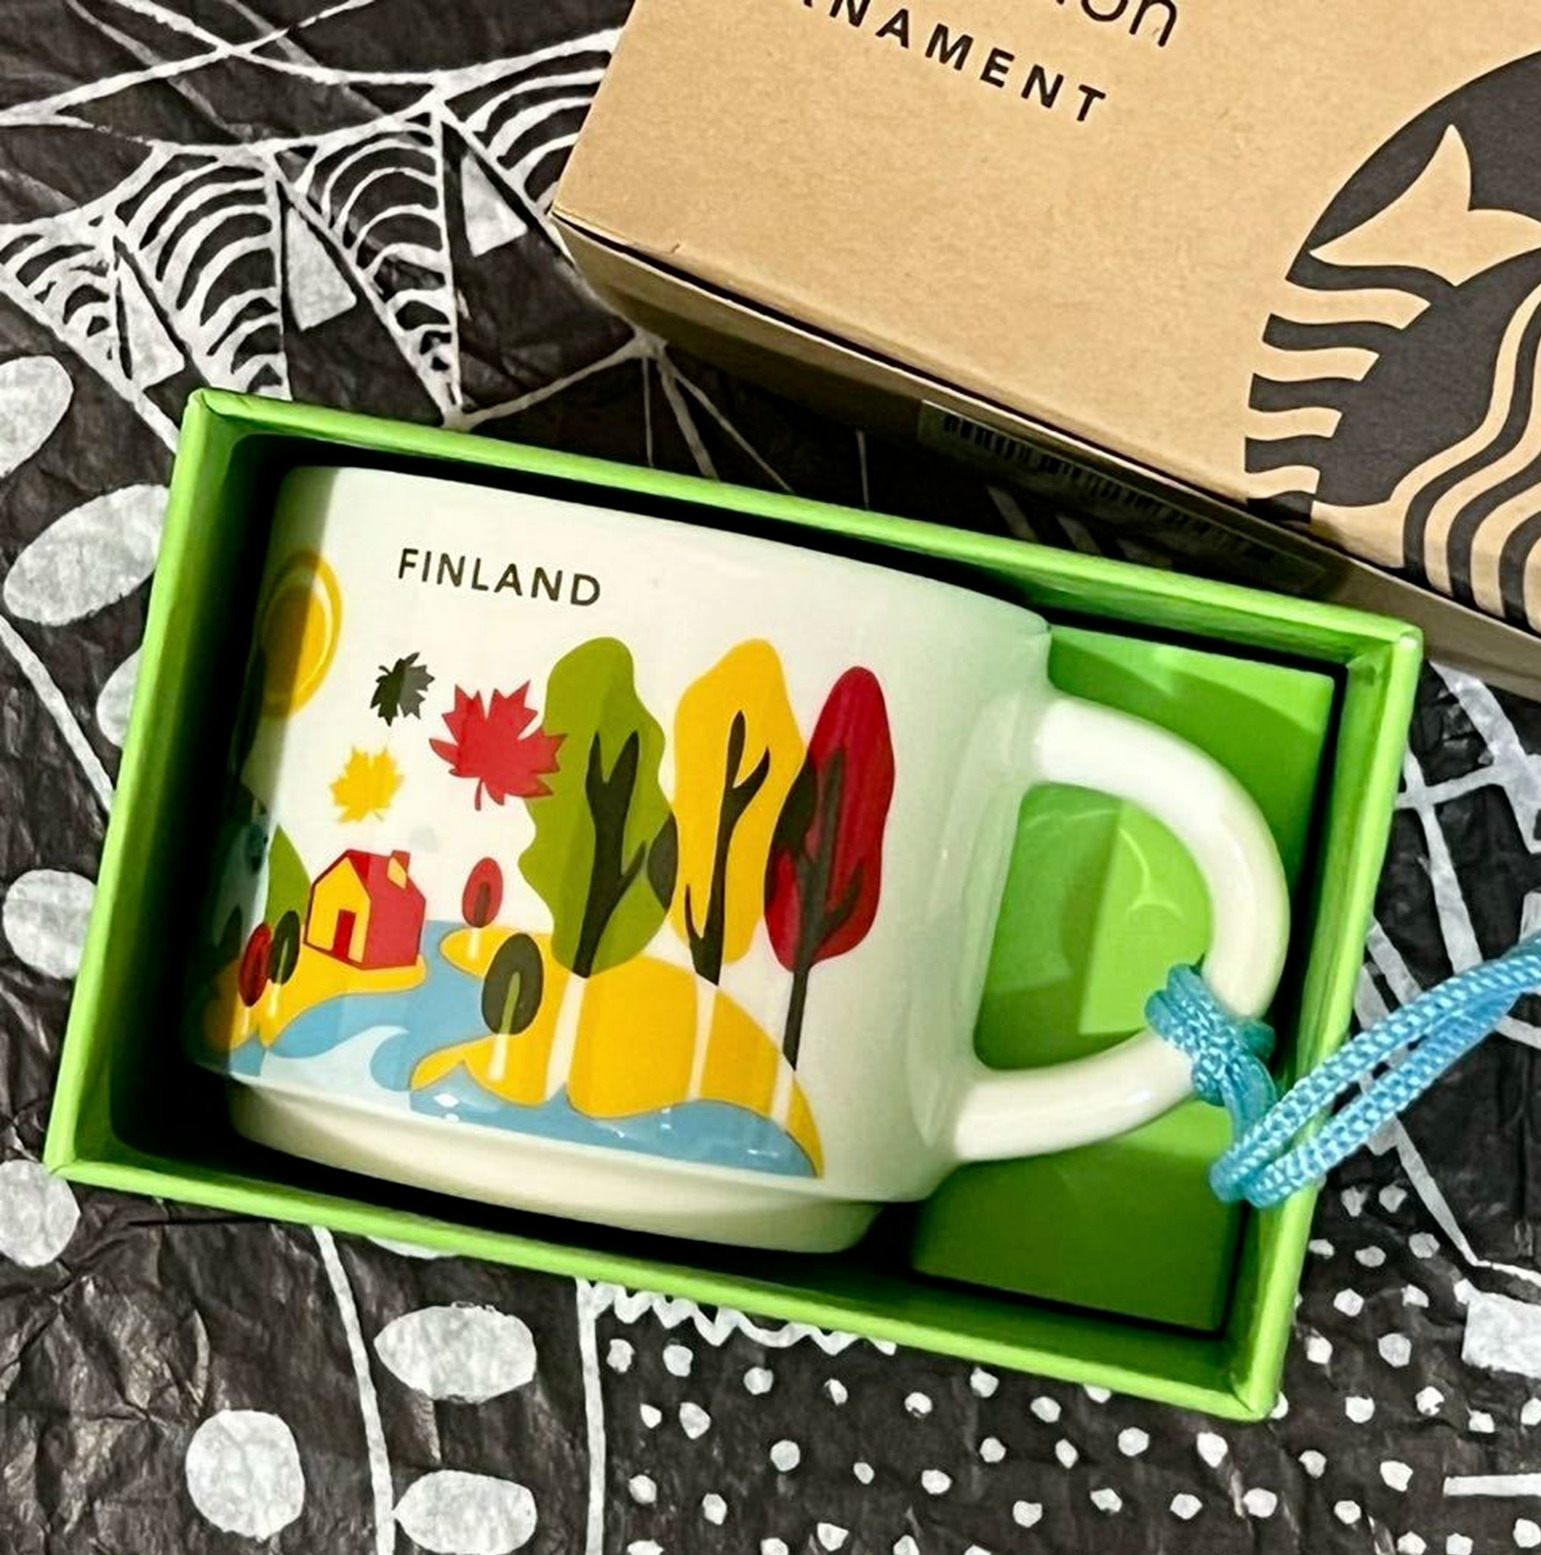 Finland Starbucks Coffee Cup Mug 2oz You Are Here Collection Brand New with Box